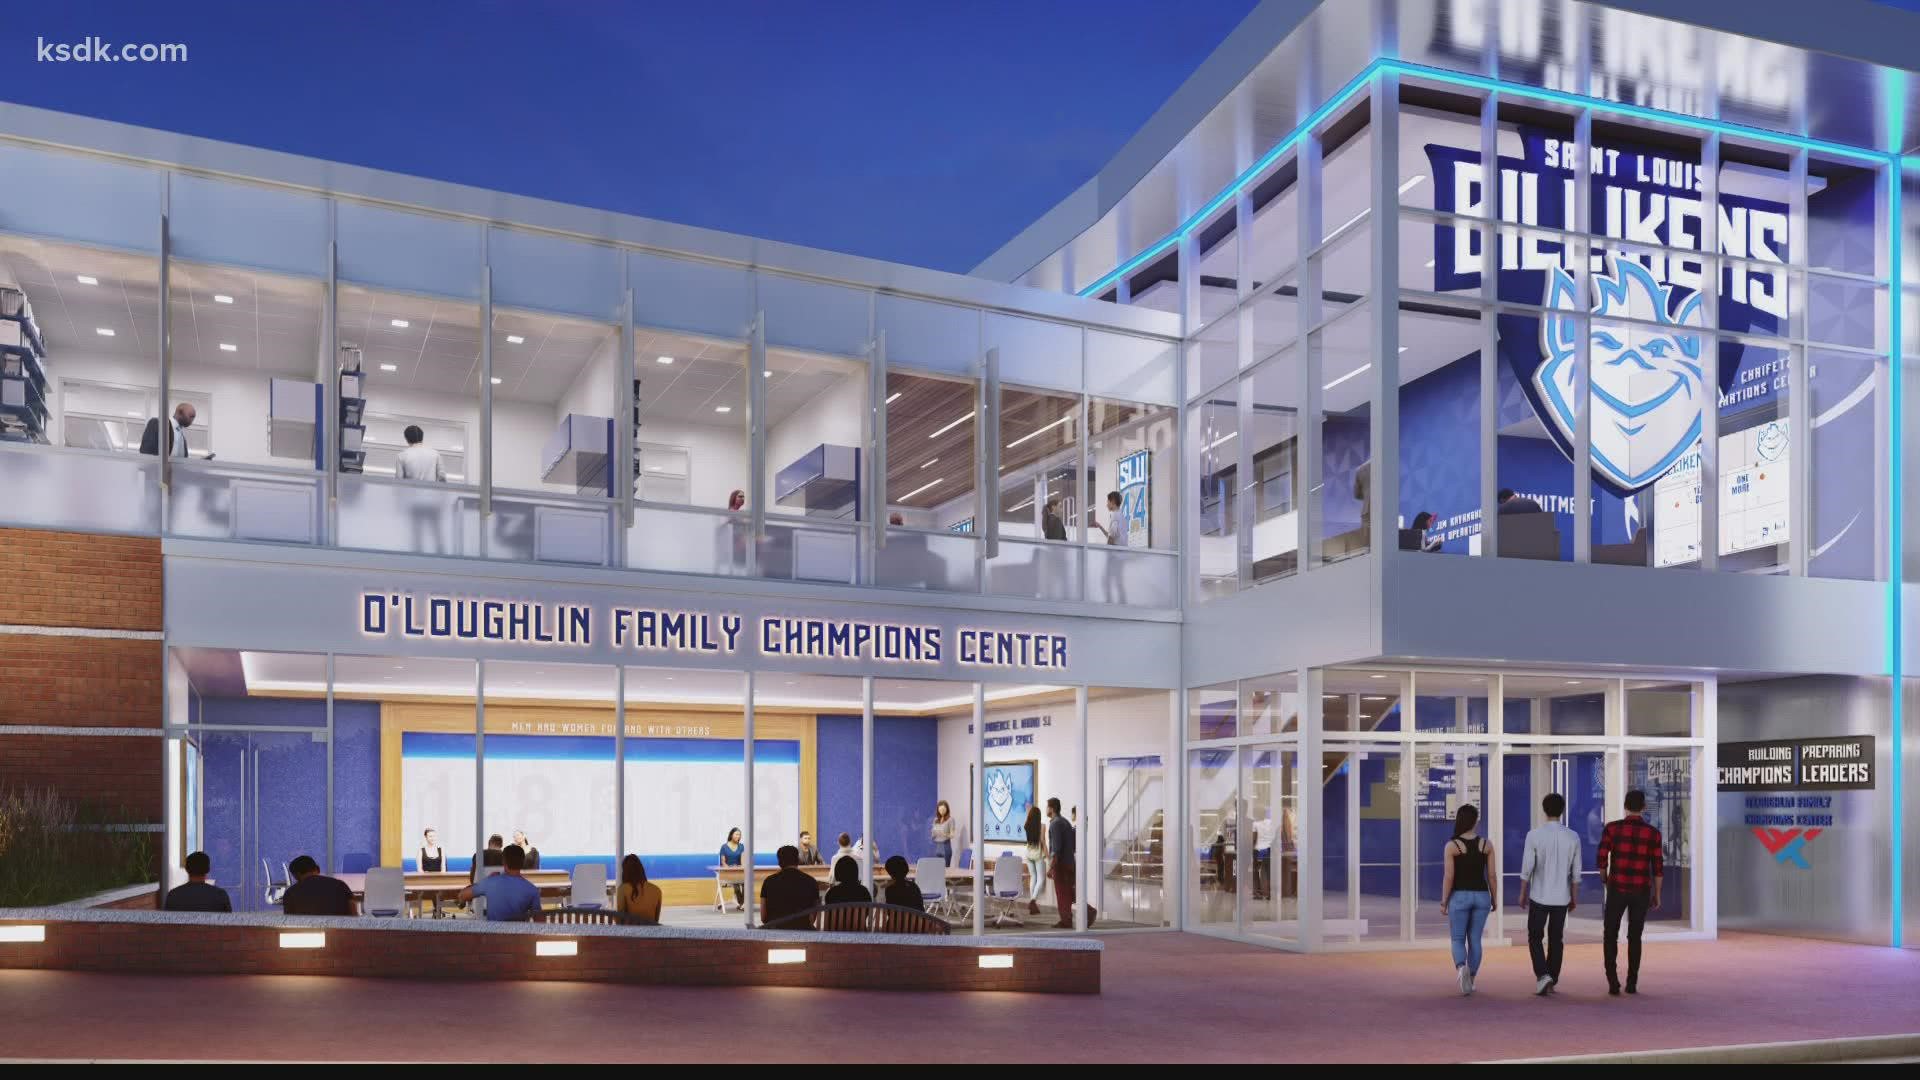 The 25,000-square-foot facility will be connected to Chaifetz Arena and impact more than 400 student-athletes